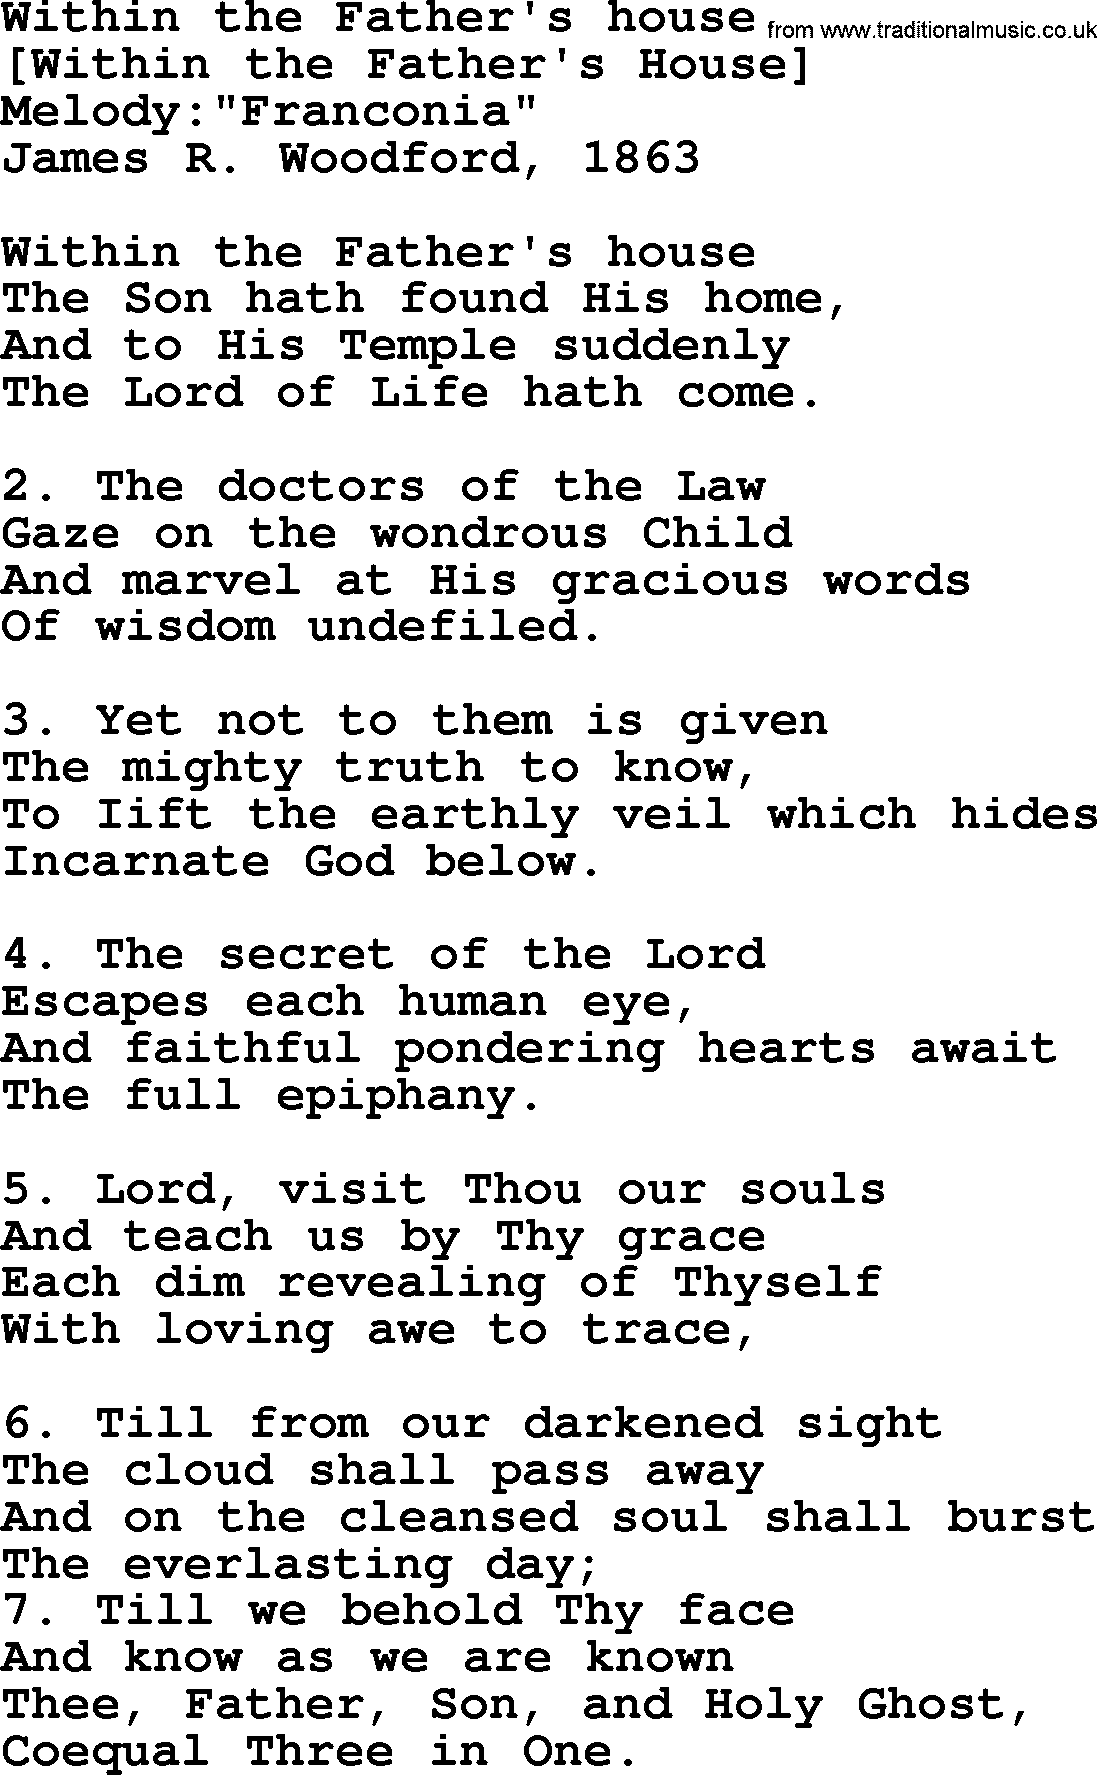 Old English Song: Within The Father's House lyrics